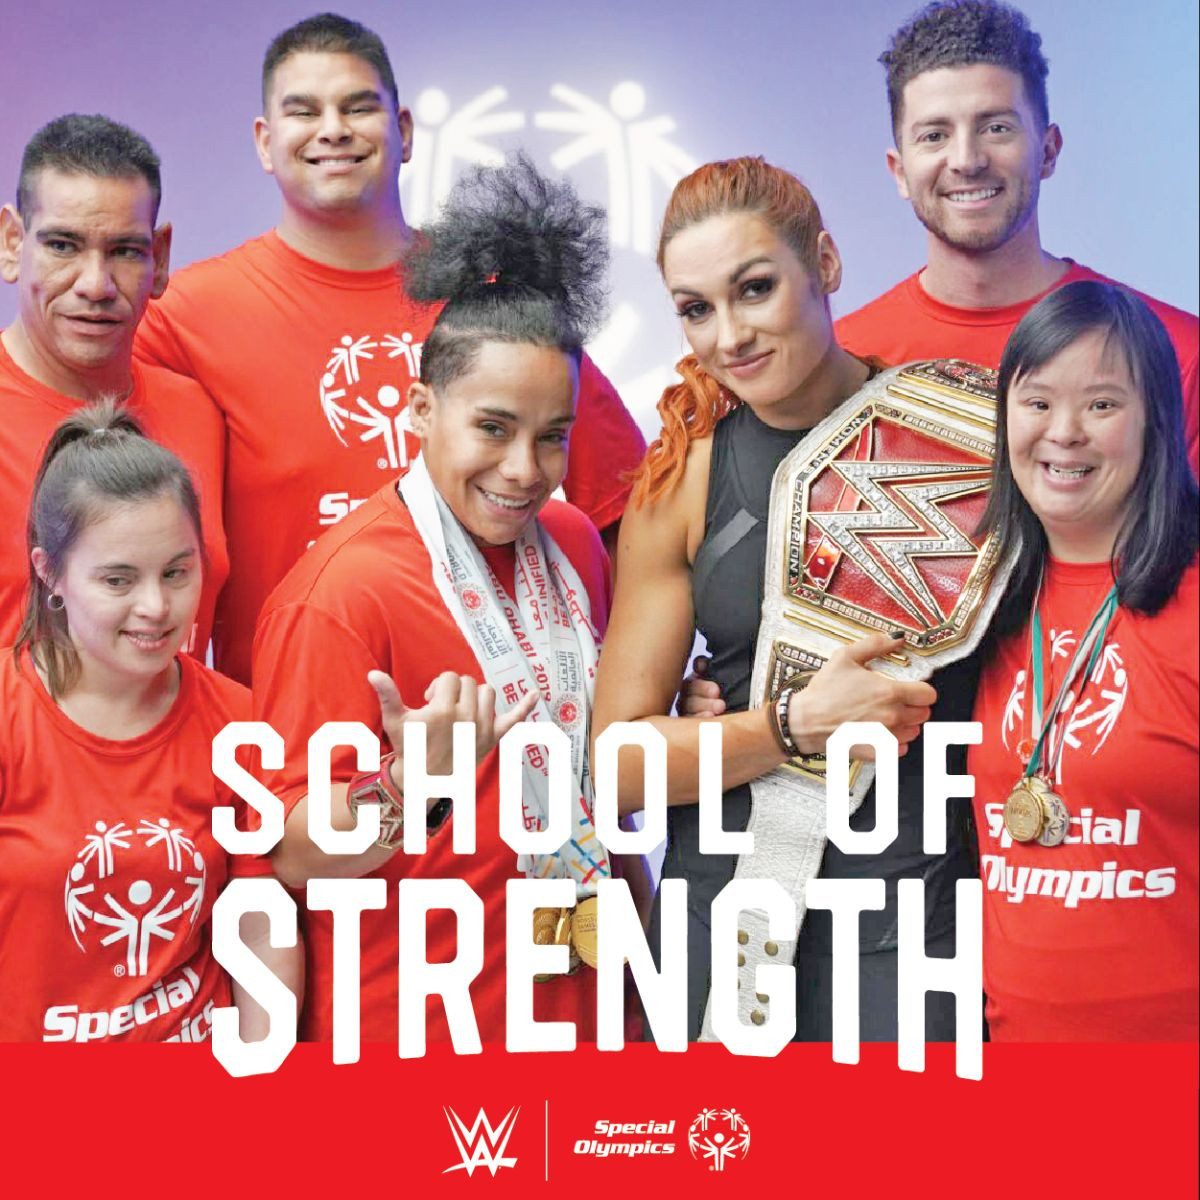 WWE star Becky Lynch features in workout videos alongside six Special Olympics athletes ©Special Olympics